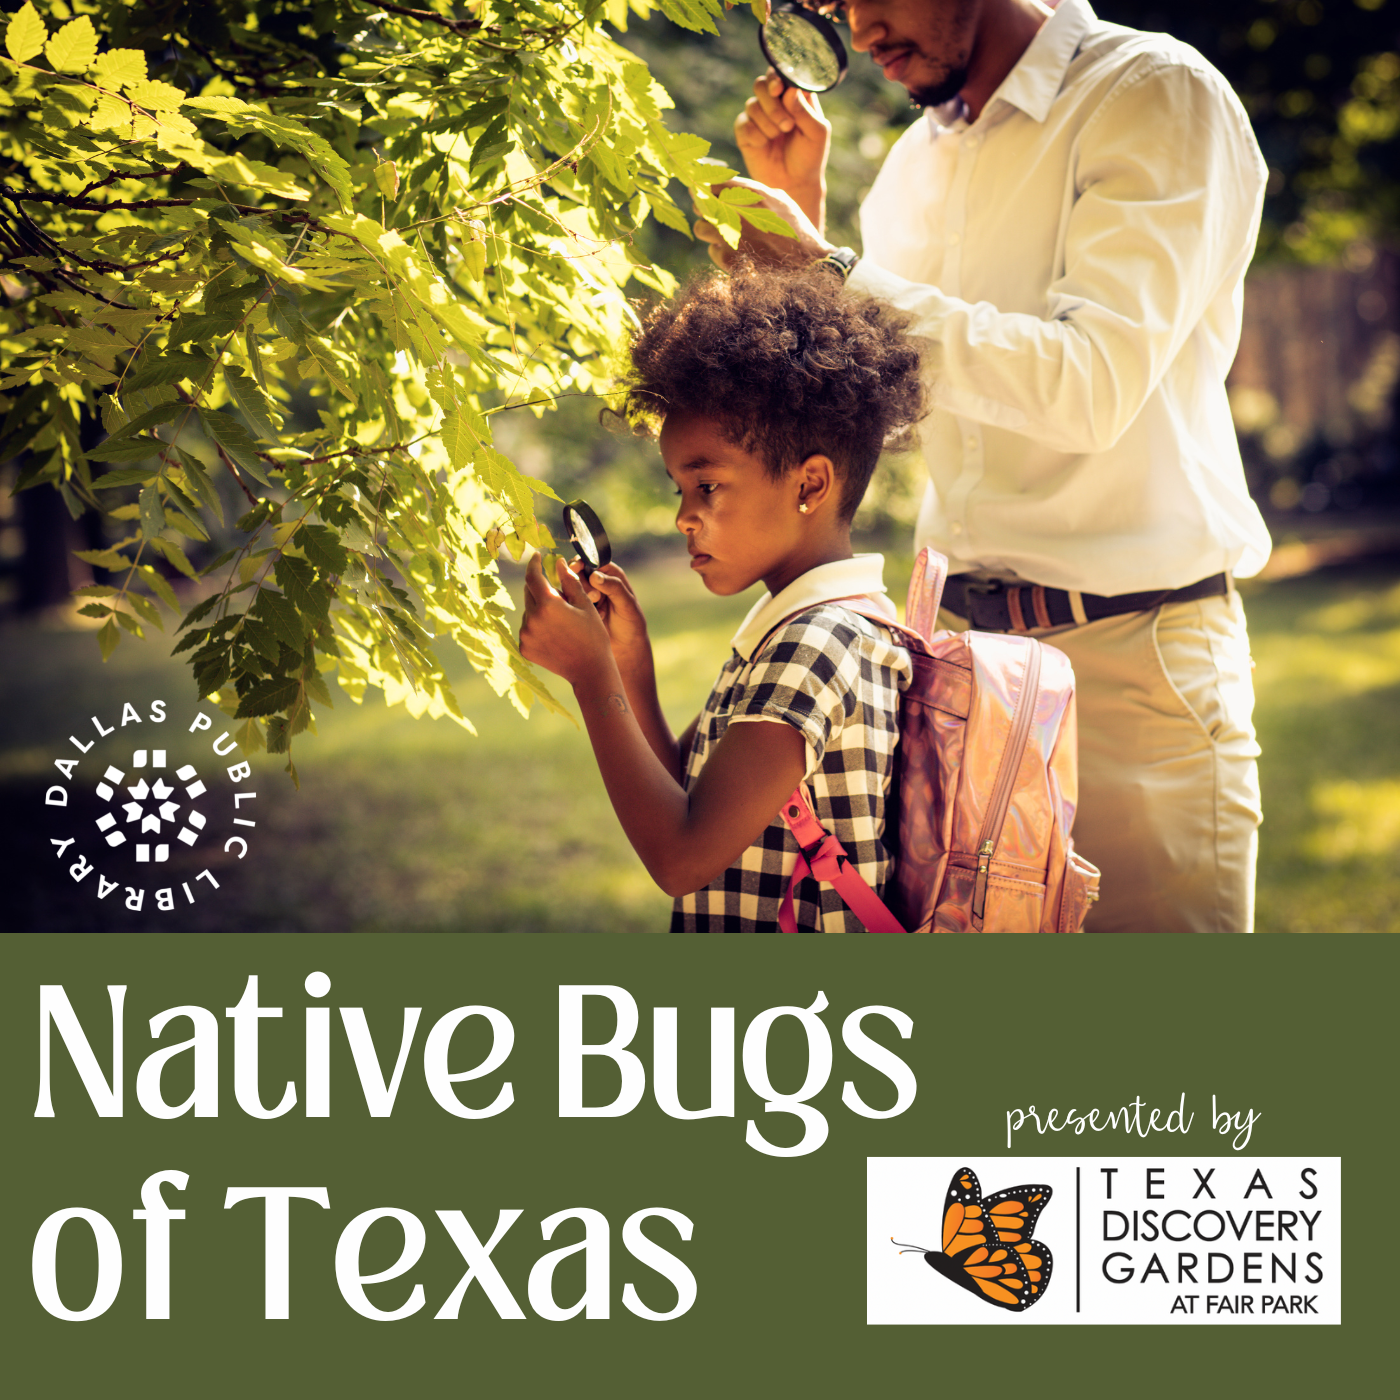 This program is for anyone who has an interest in insects and learning about the one's that are native to Texas